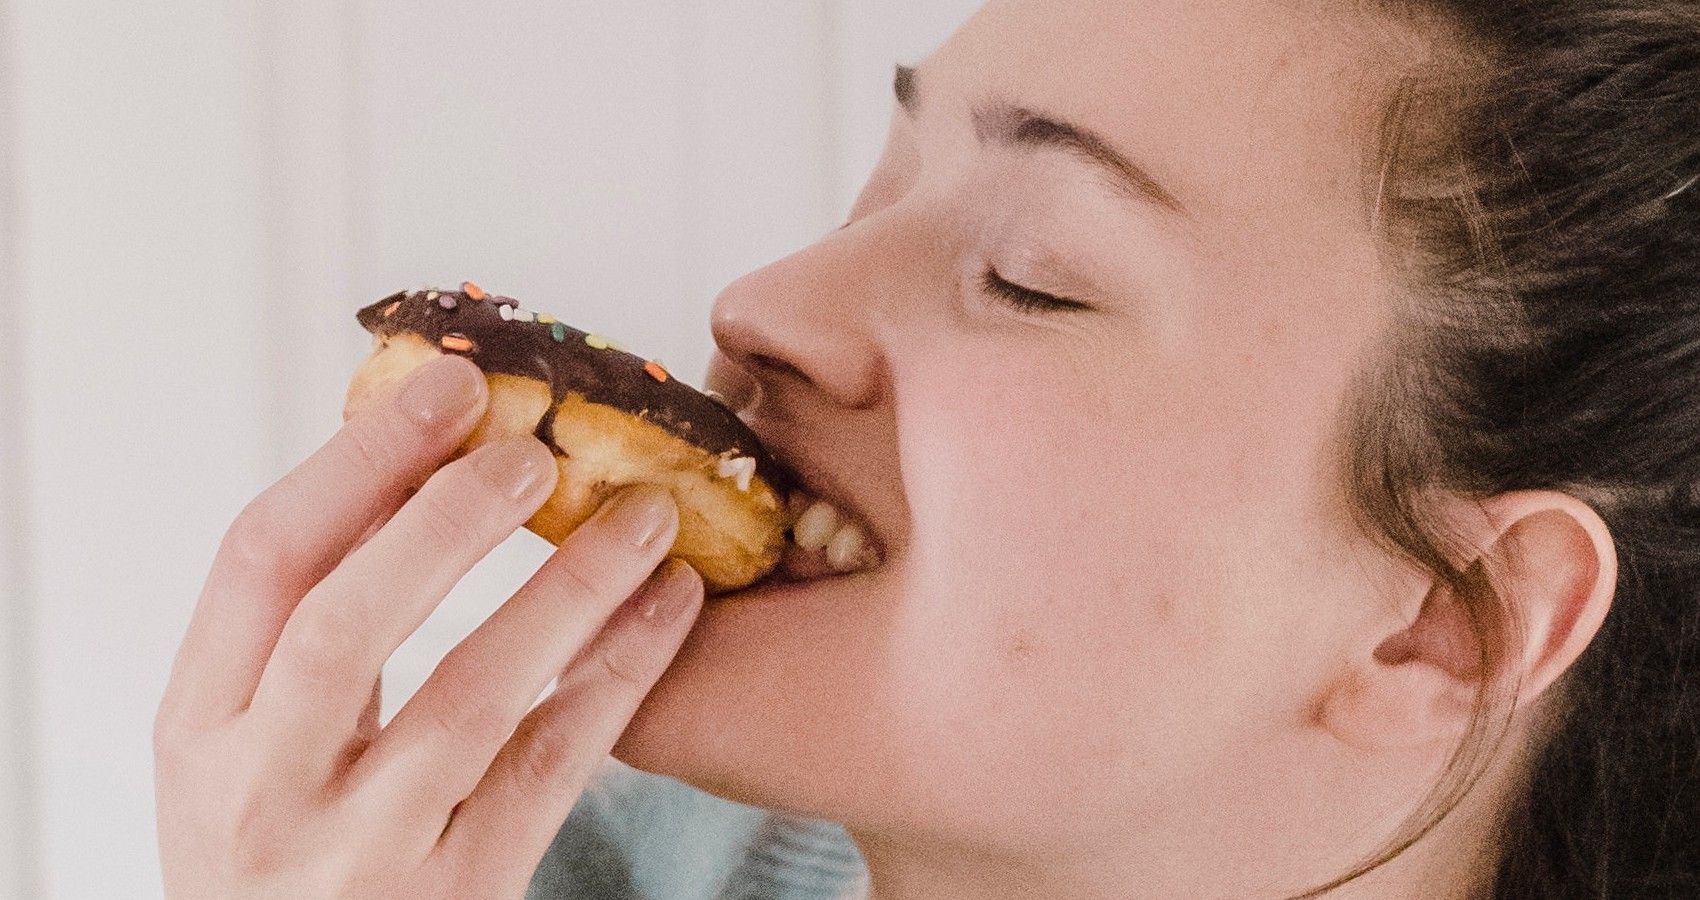 A woman eating a chocolate donut